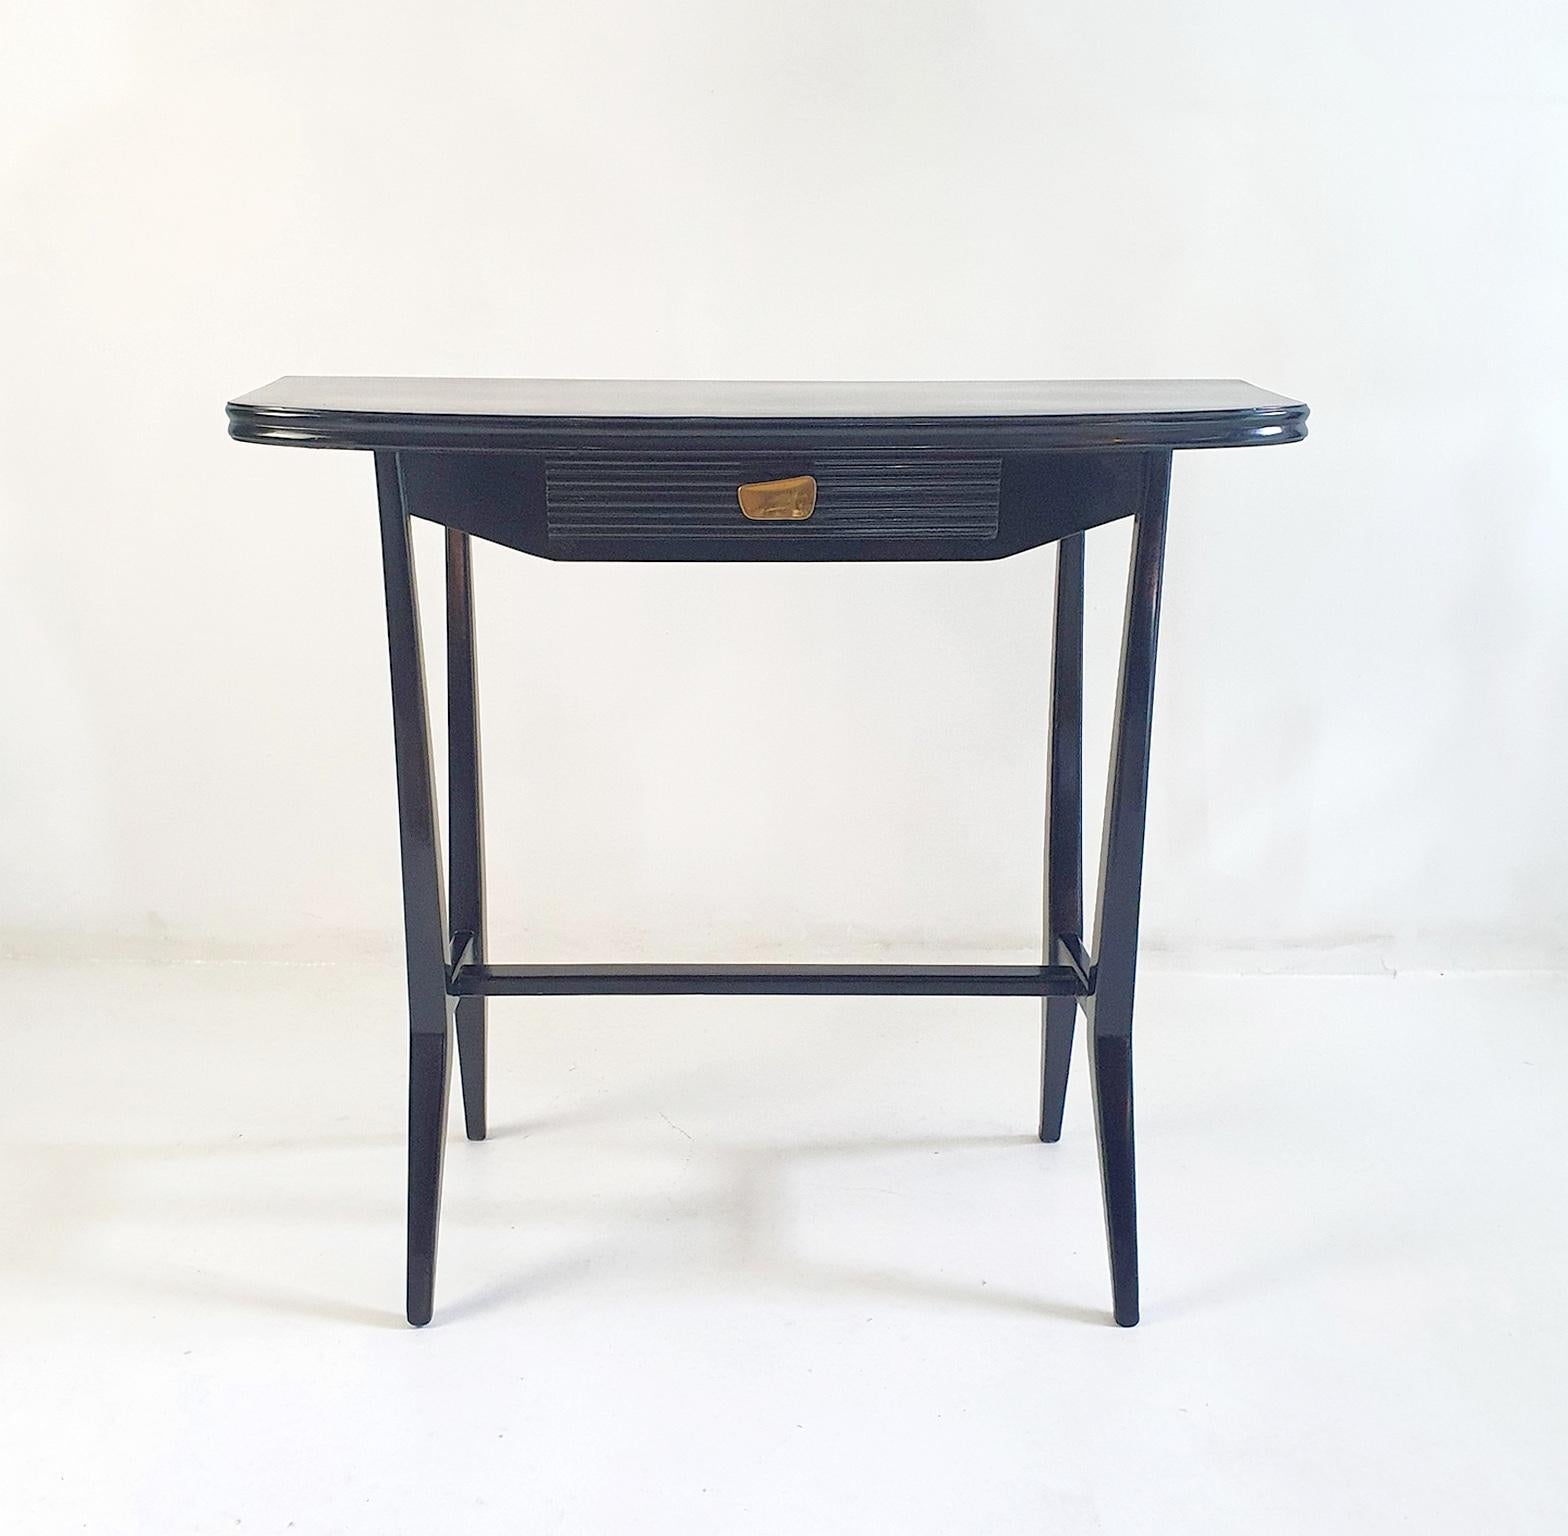 Stylish mid-century Italian console table in french polished black ash with an original designer handle in brass. This table is perfect for small and tight spaced interiors. The table has been professionally restored and polished by our restoration